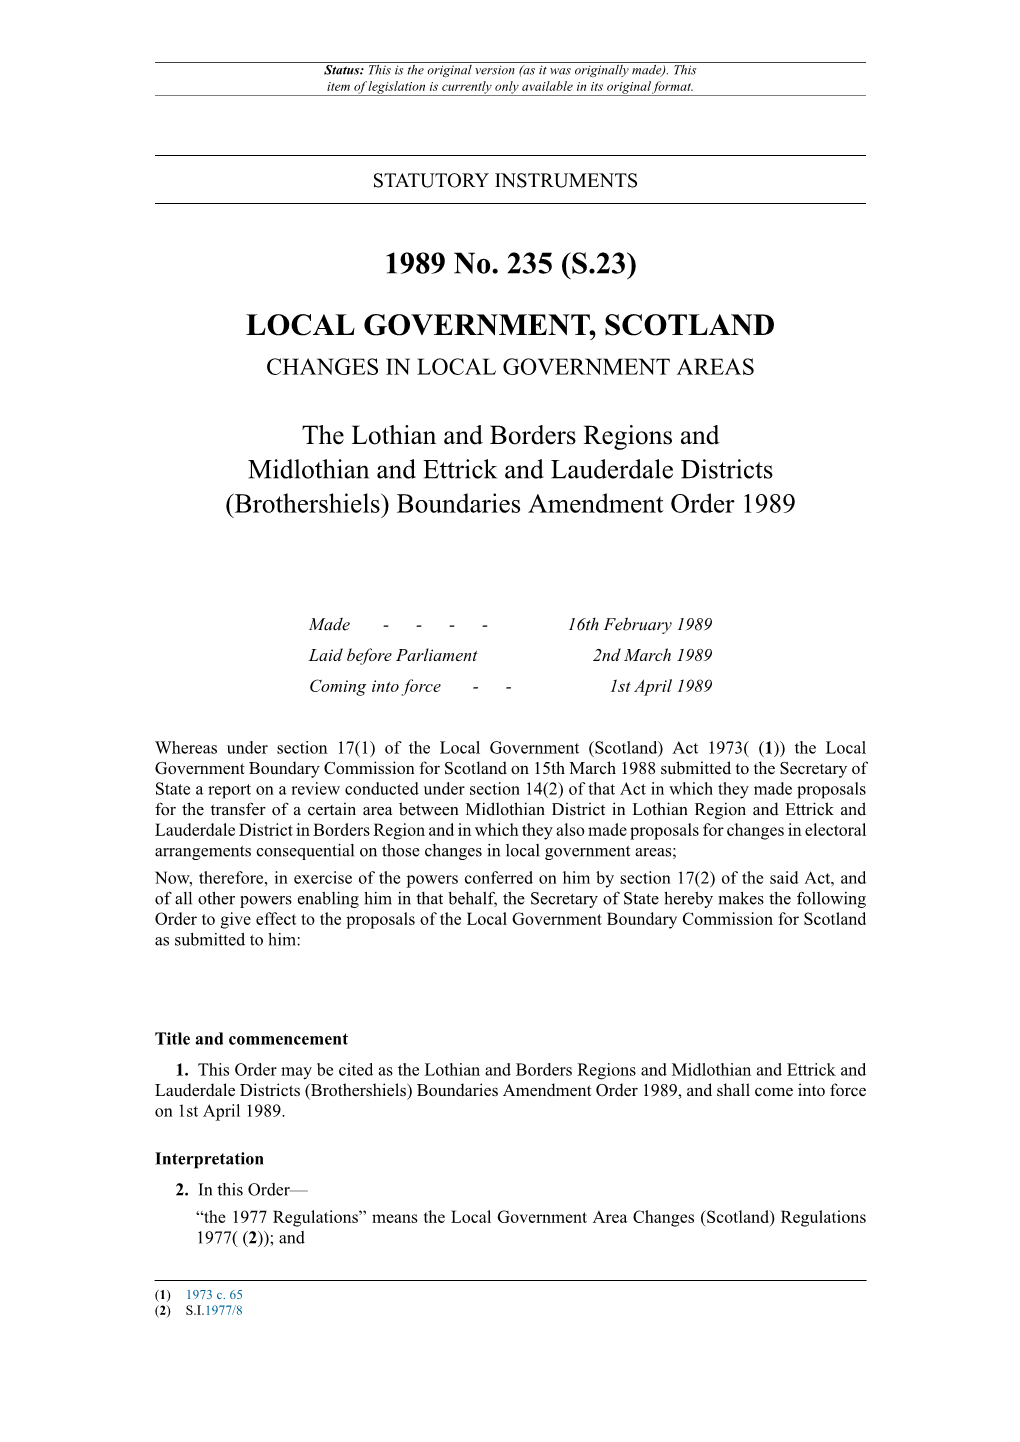 The Lothian and Borders Regions and Midlothian and Ettrick and Lauderdale Districts (Brothershiels) Boundaries Amendment Order 1989